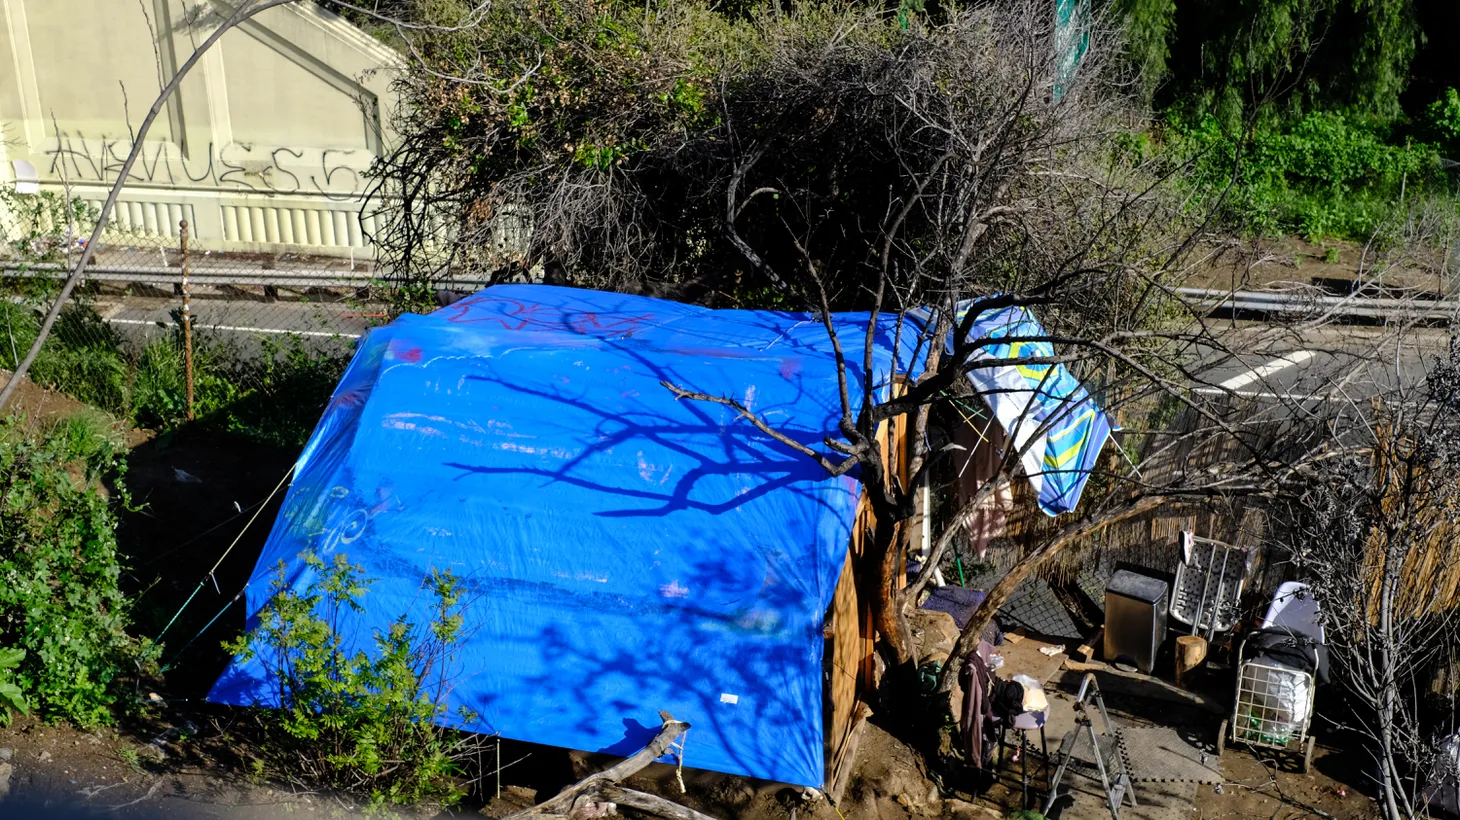 A homeless encampment is set up in Elysian Park near the 110 freeway and Dodger Stadium.